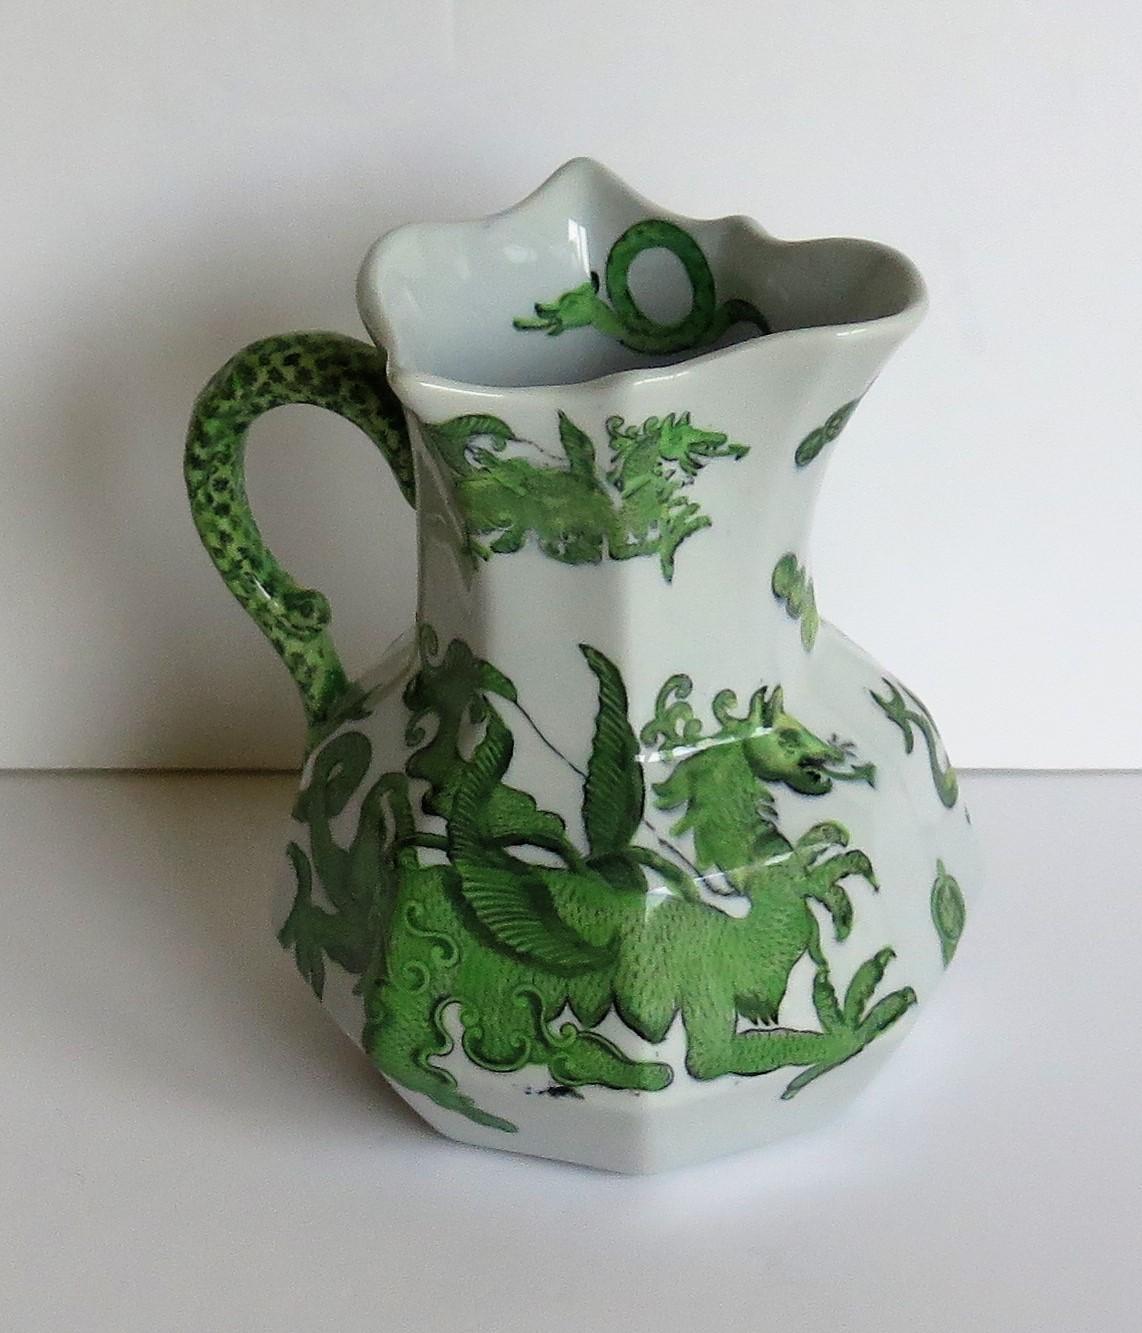 Hand-Painted Mason's Ironstone Jug or Pitcher in Green Chinese Dragon Pattern, 19th Century